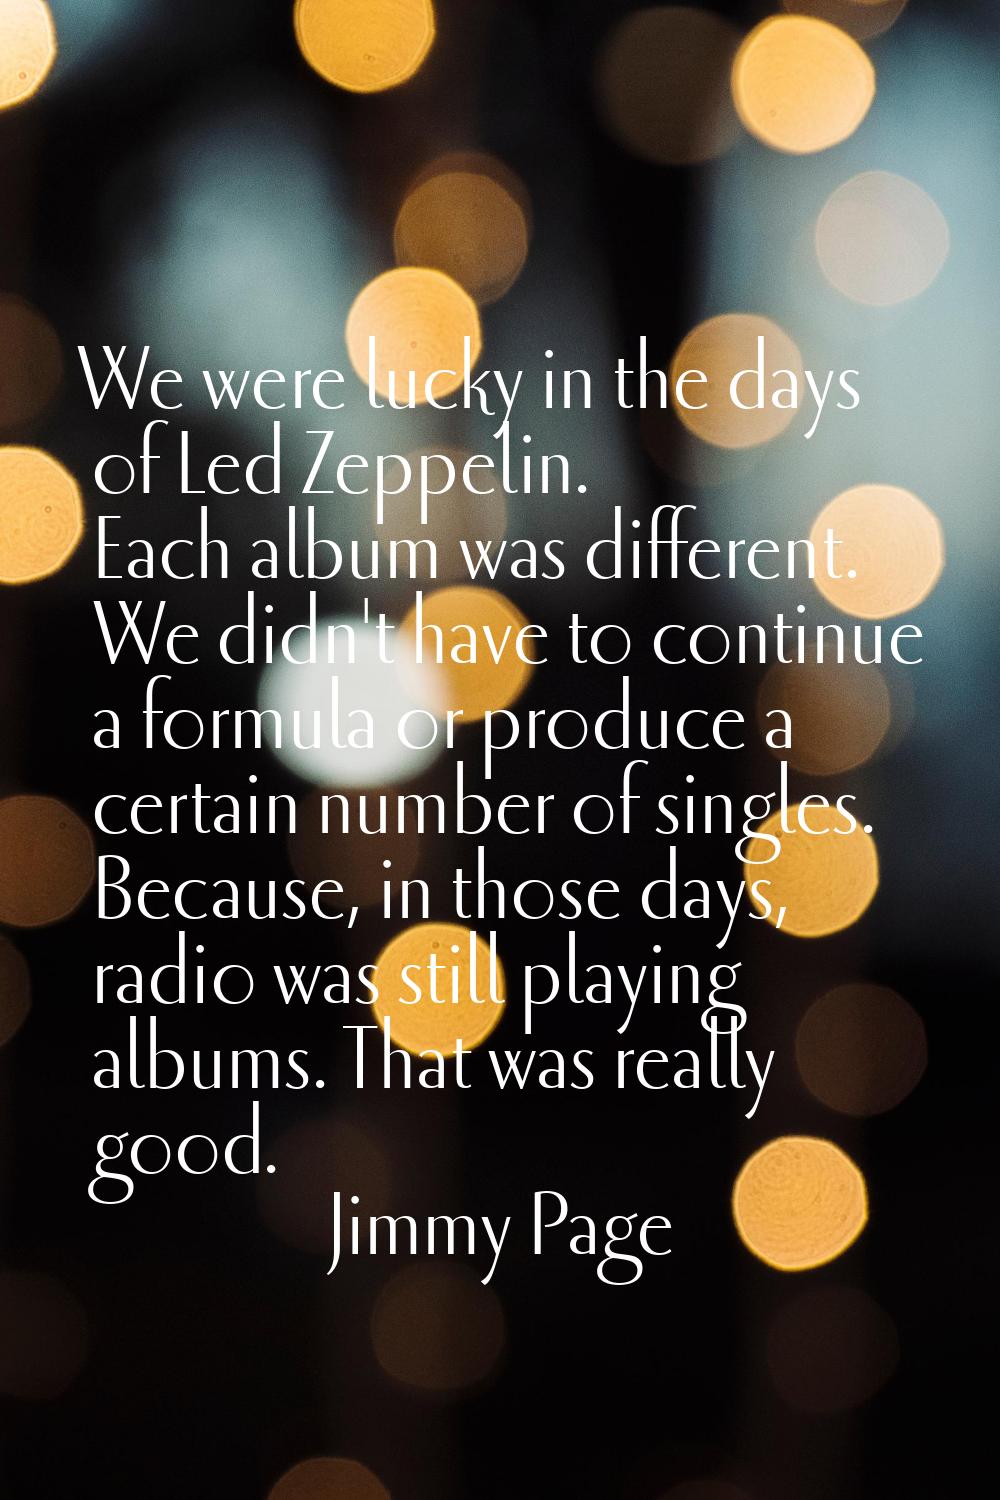 We were lucky in the days of Led Zeppelin. Each album was different. We didn't have to continue a f